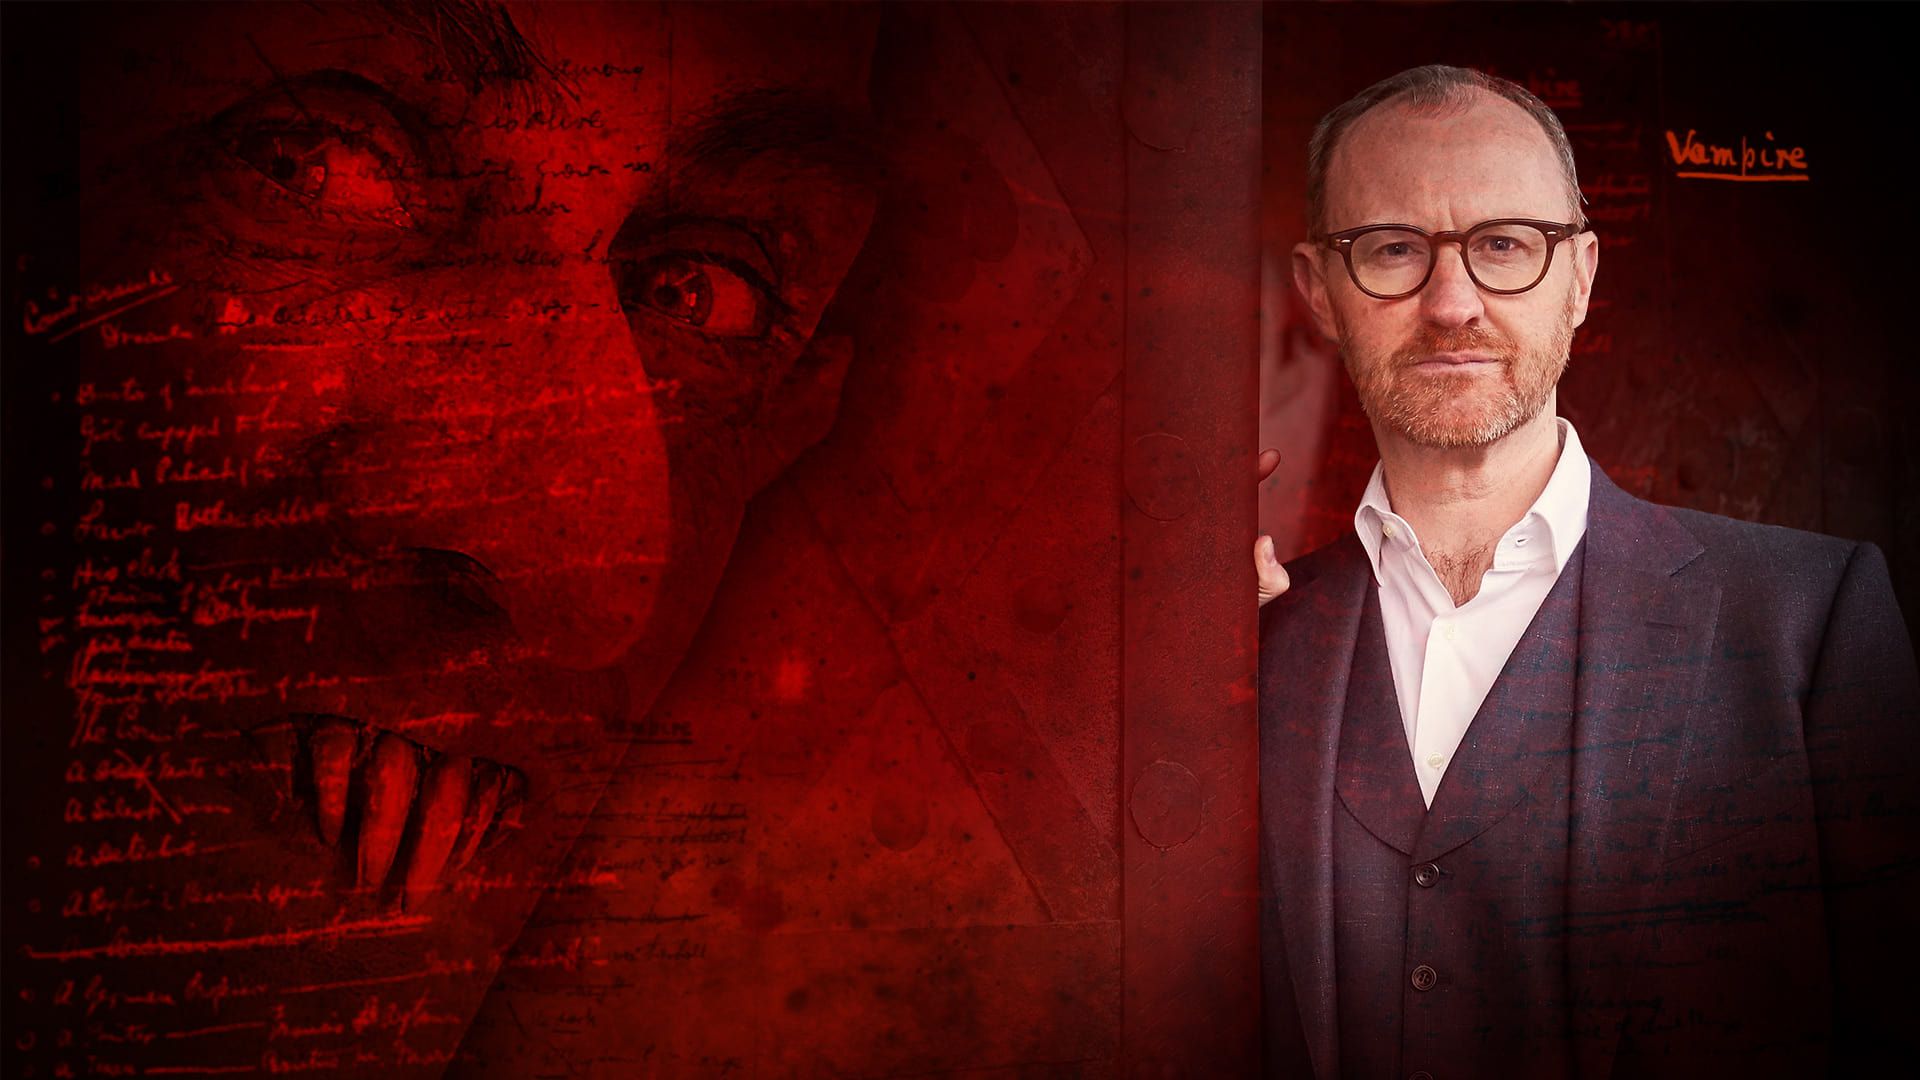 Cubierta de In Search of Dracula with Mark Gatiss